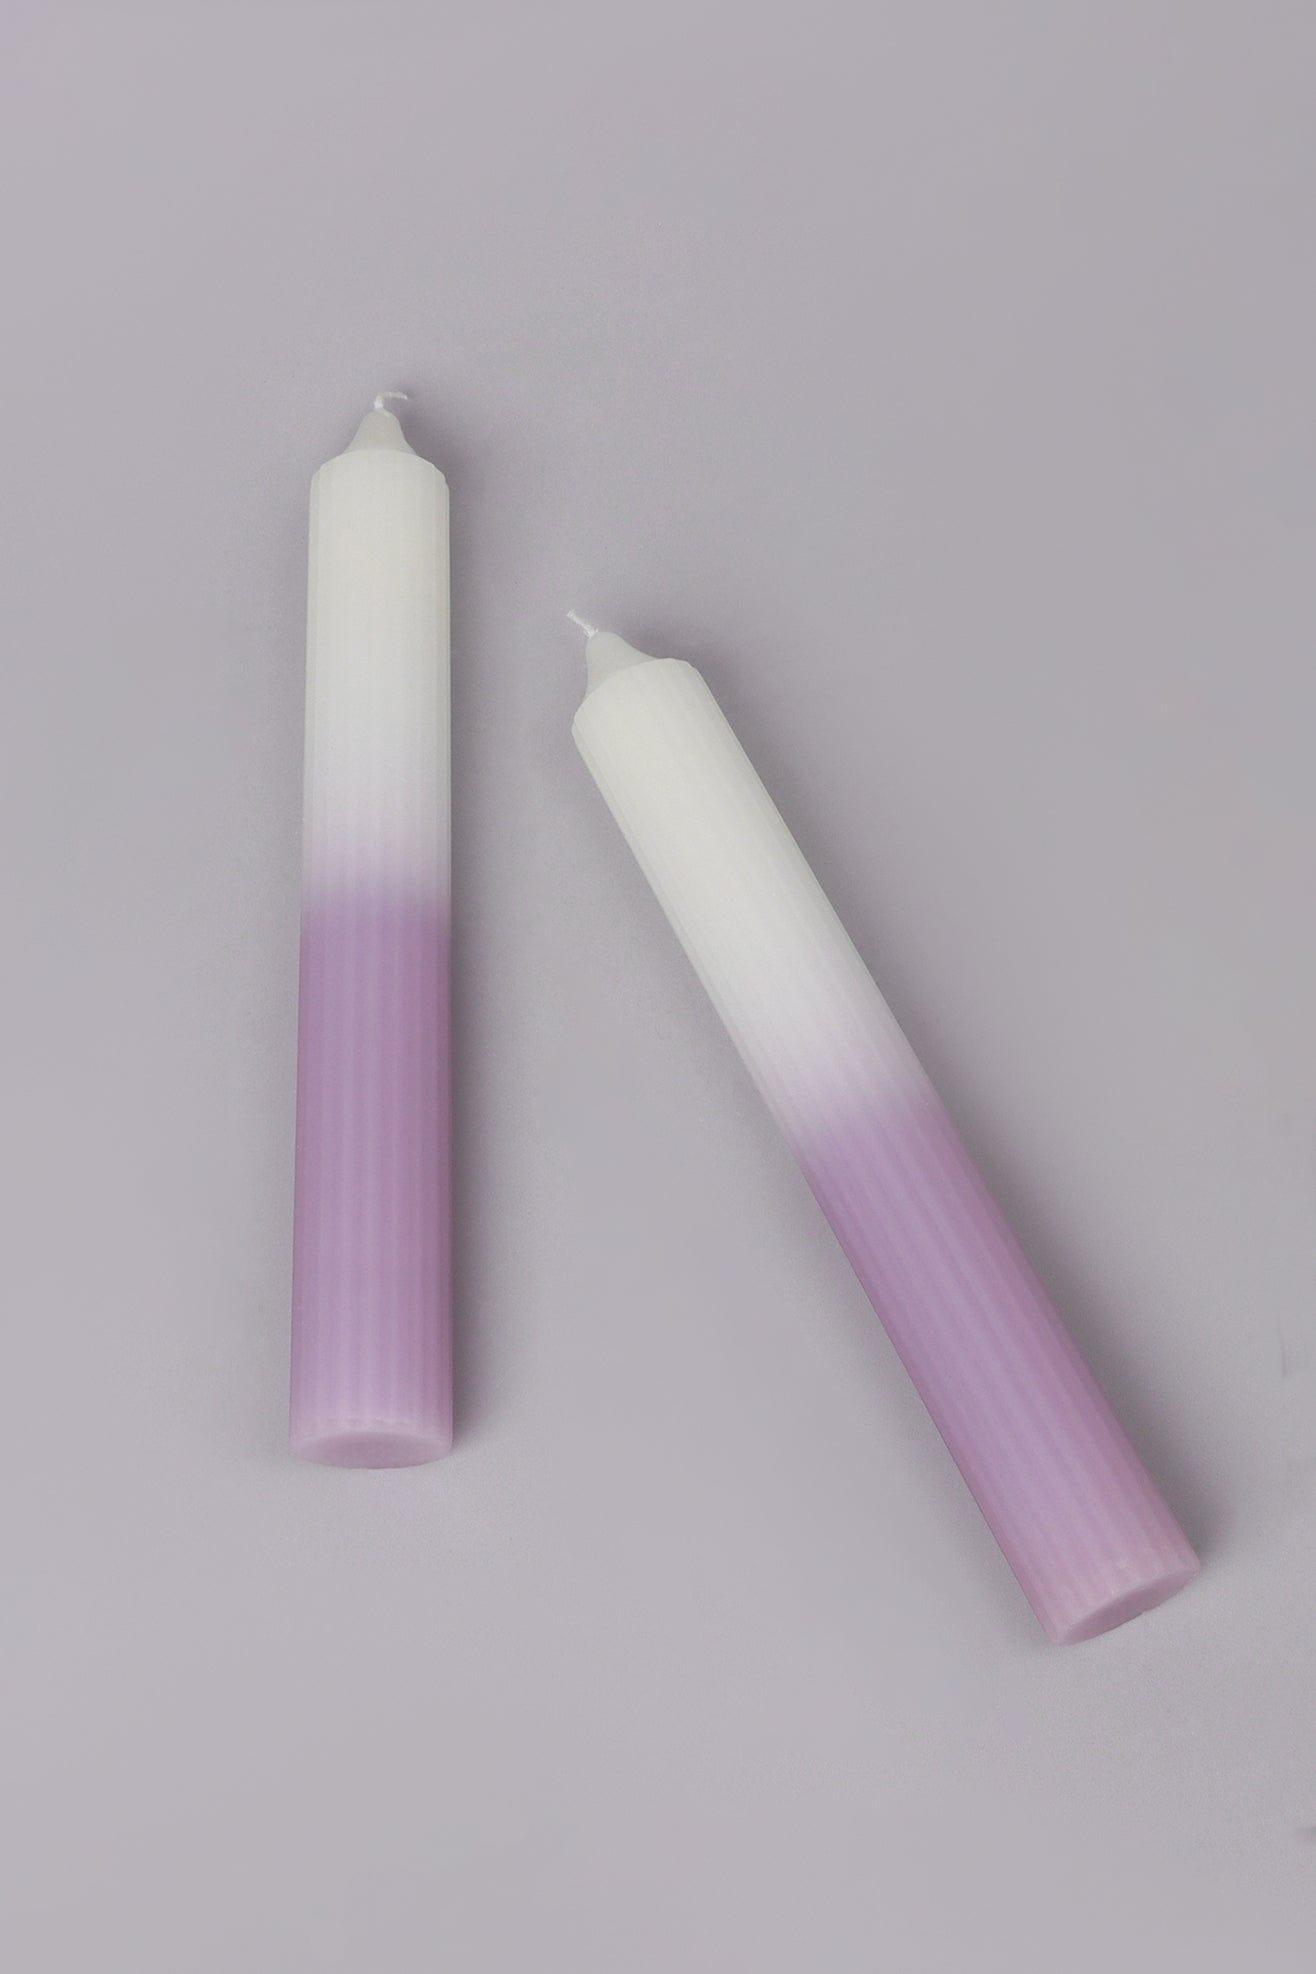 G Decor Candles & Candle Holders Ava Half-Tone Purple Ombre Ribbed Pillar Candles